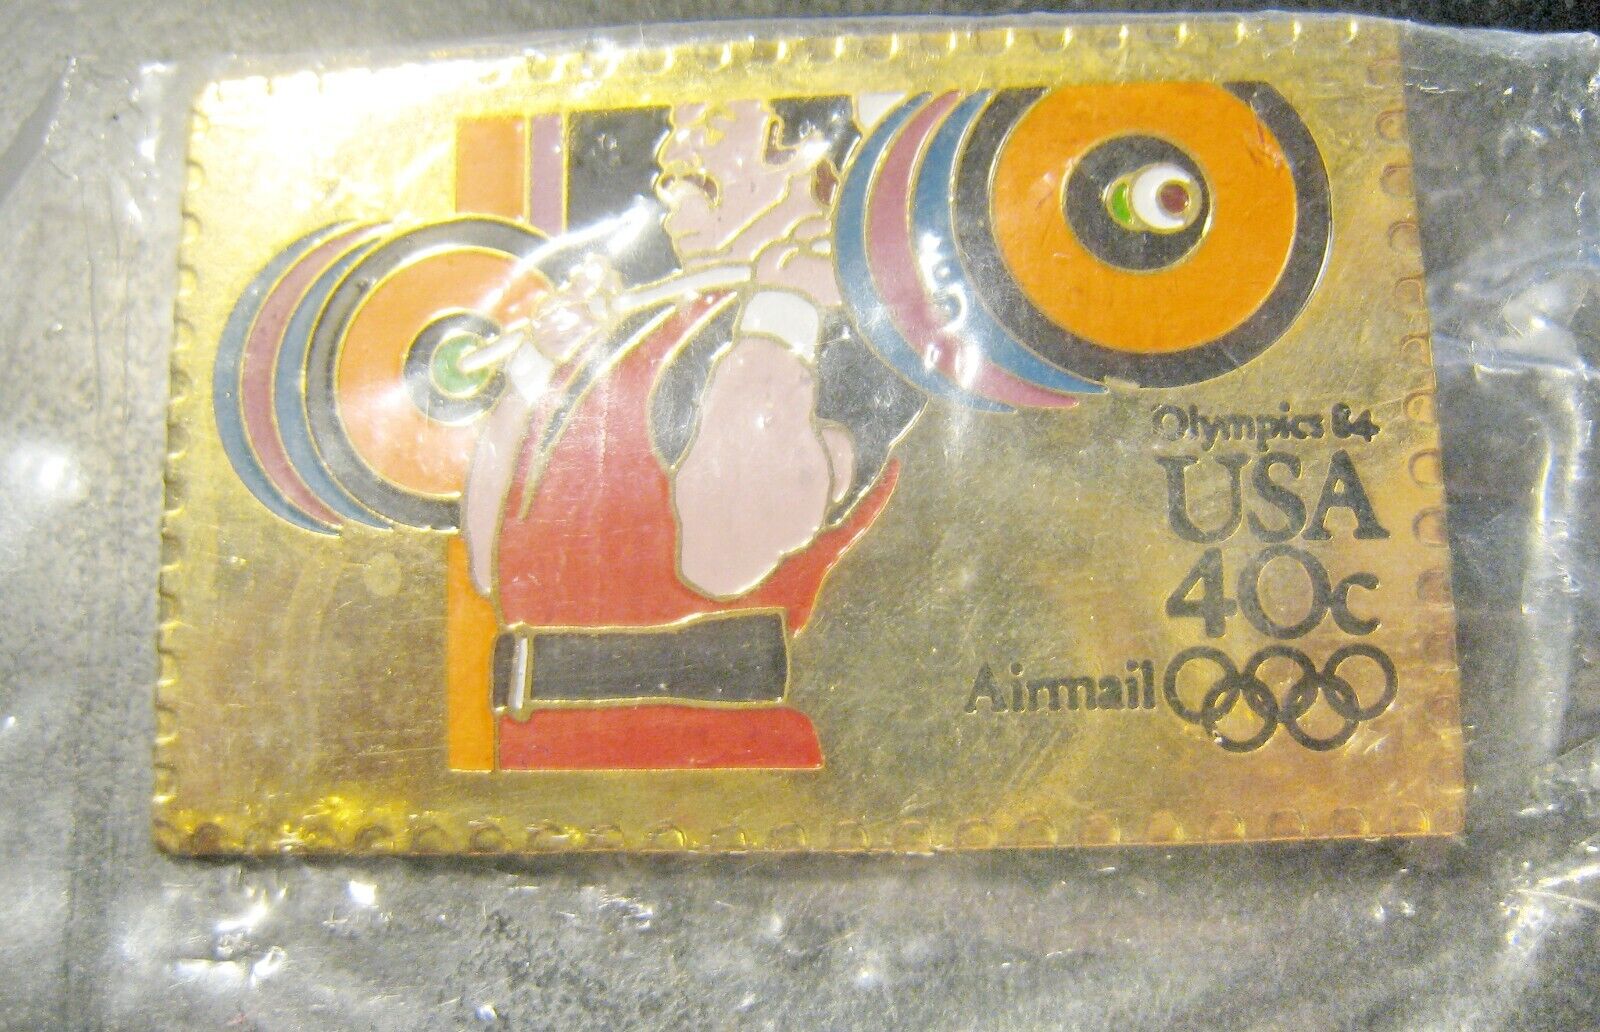 USA WEIGHTLIFTING OLYMPIC TEAM LOS ANGELES 84 OFFICIAL STAMP PIN NEW SEALED